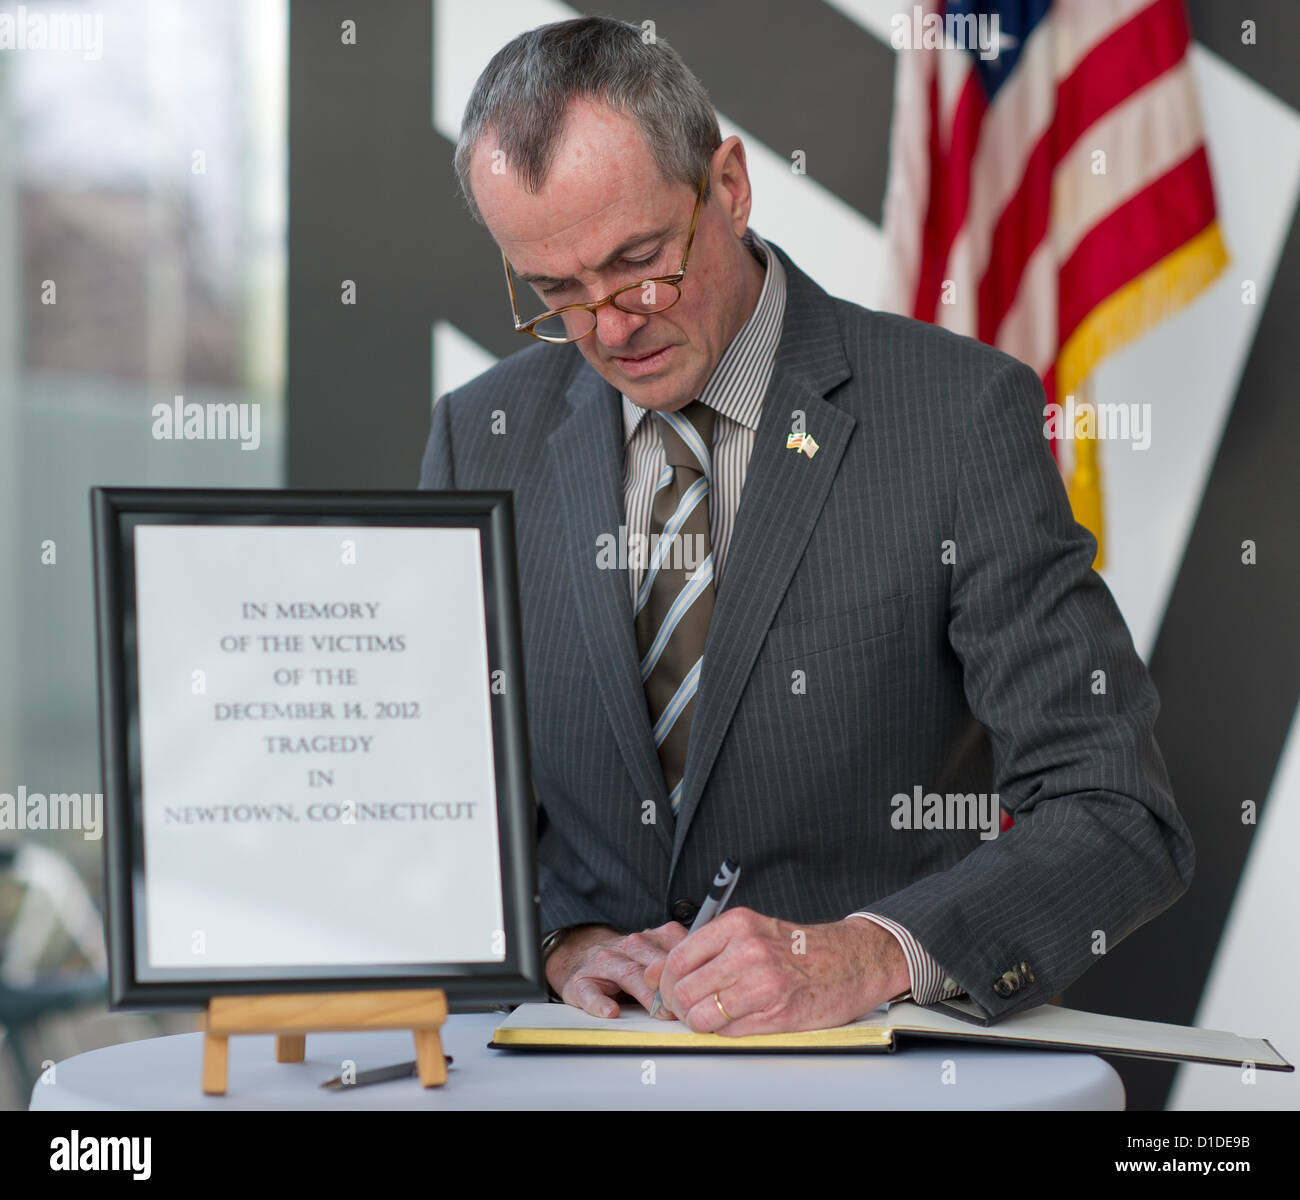 Philip D. Murphy, US ambassador in Germany, signs in a condolence book for the victims of a massacre at an elementary school in Newton, US Embassy Berlin, Germany, 17 December 2012. 20 children and 6 people were killed during a killing spree in the city of Newton, Connecticut, US. Photo: Tim Brakemeier Stock Photo